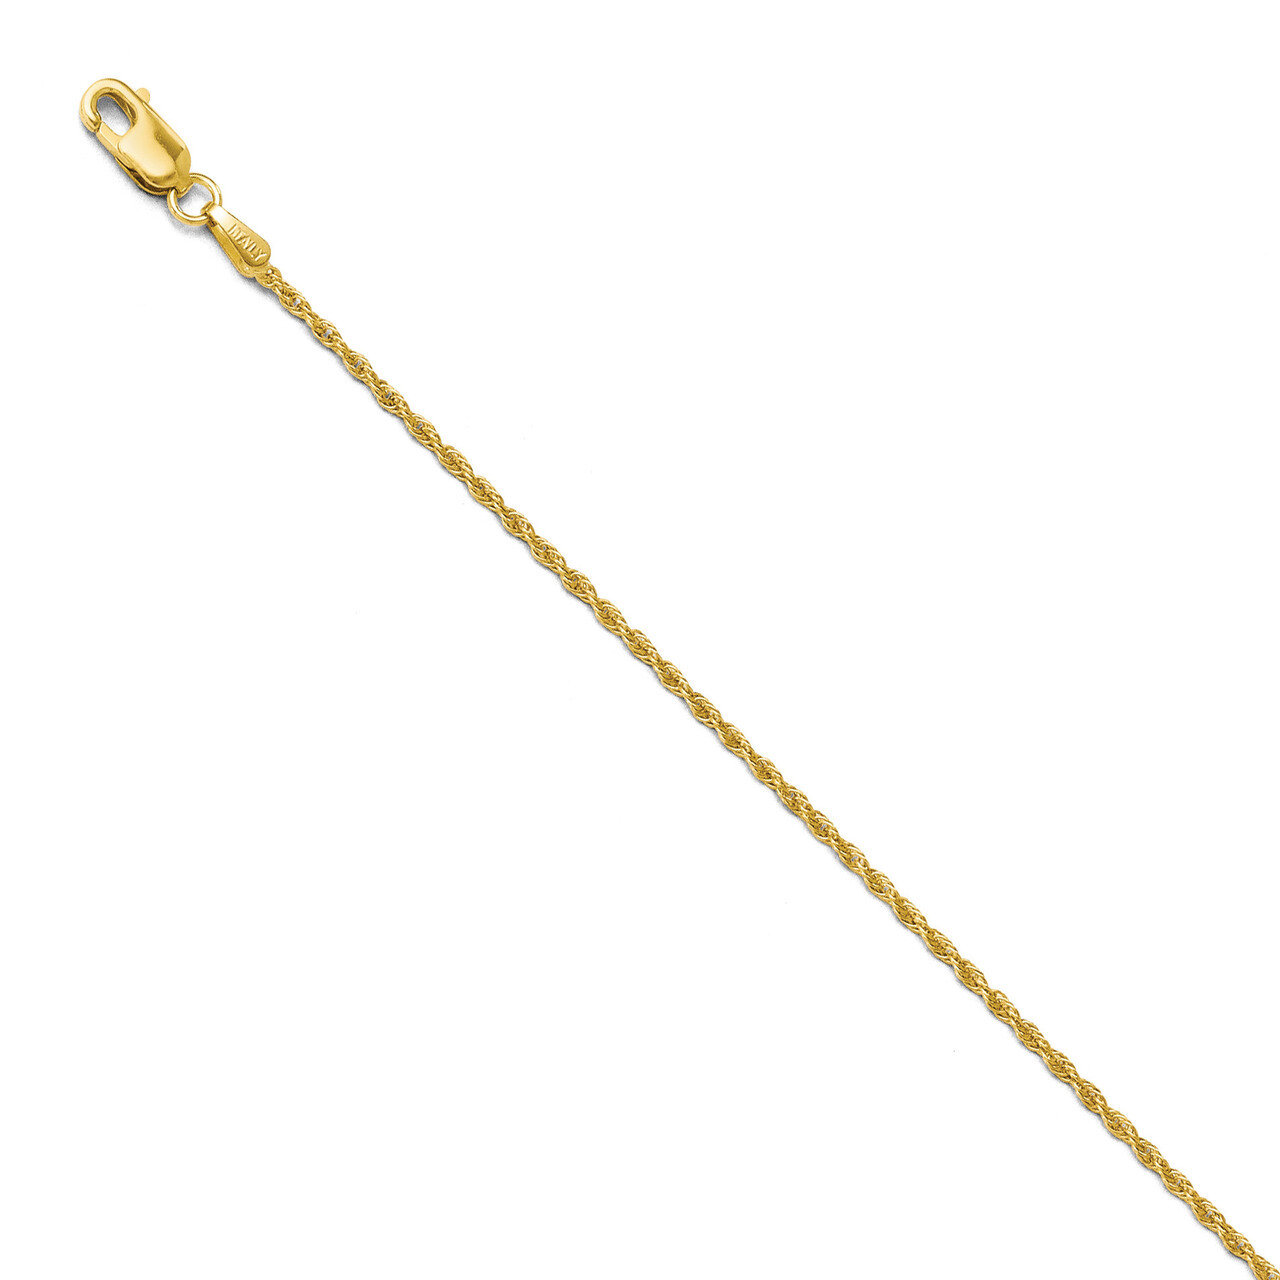 Pendant Rope Chain 18 Inch - 14k Gold HB-727-18